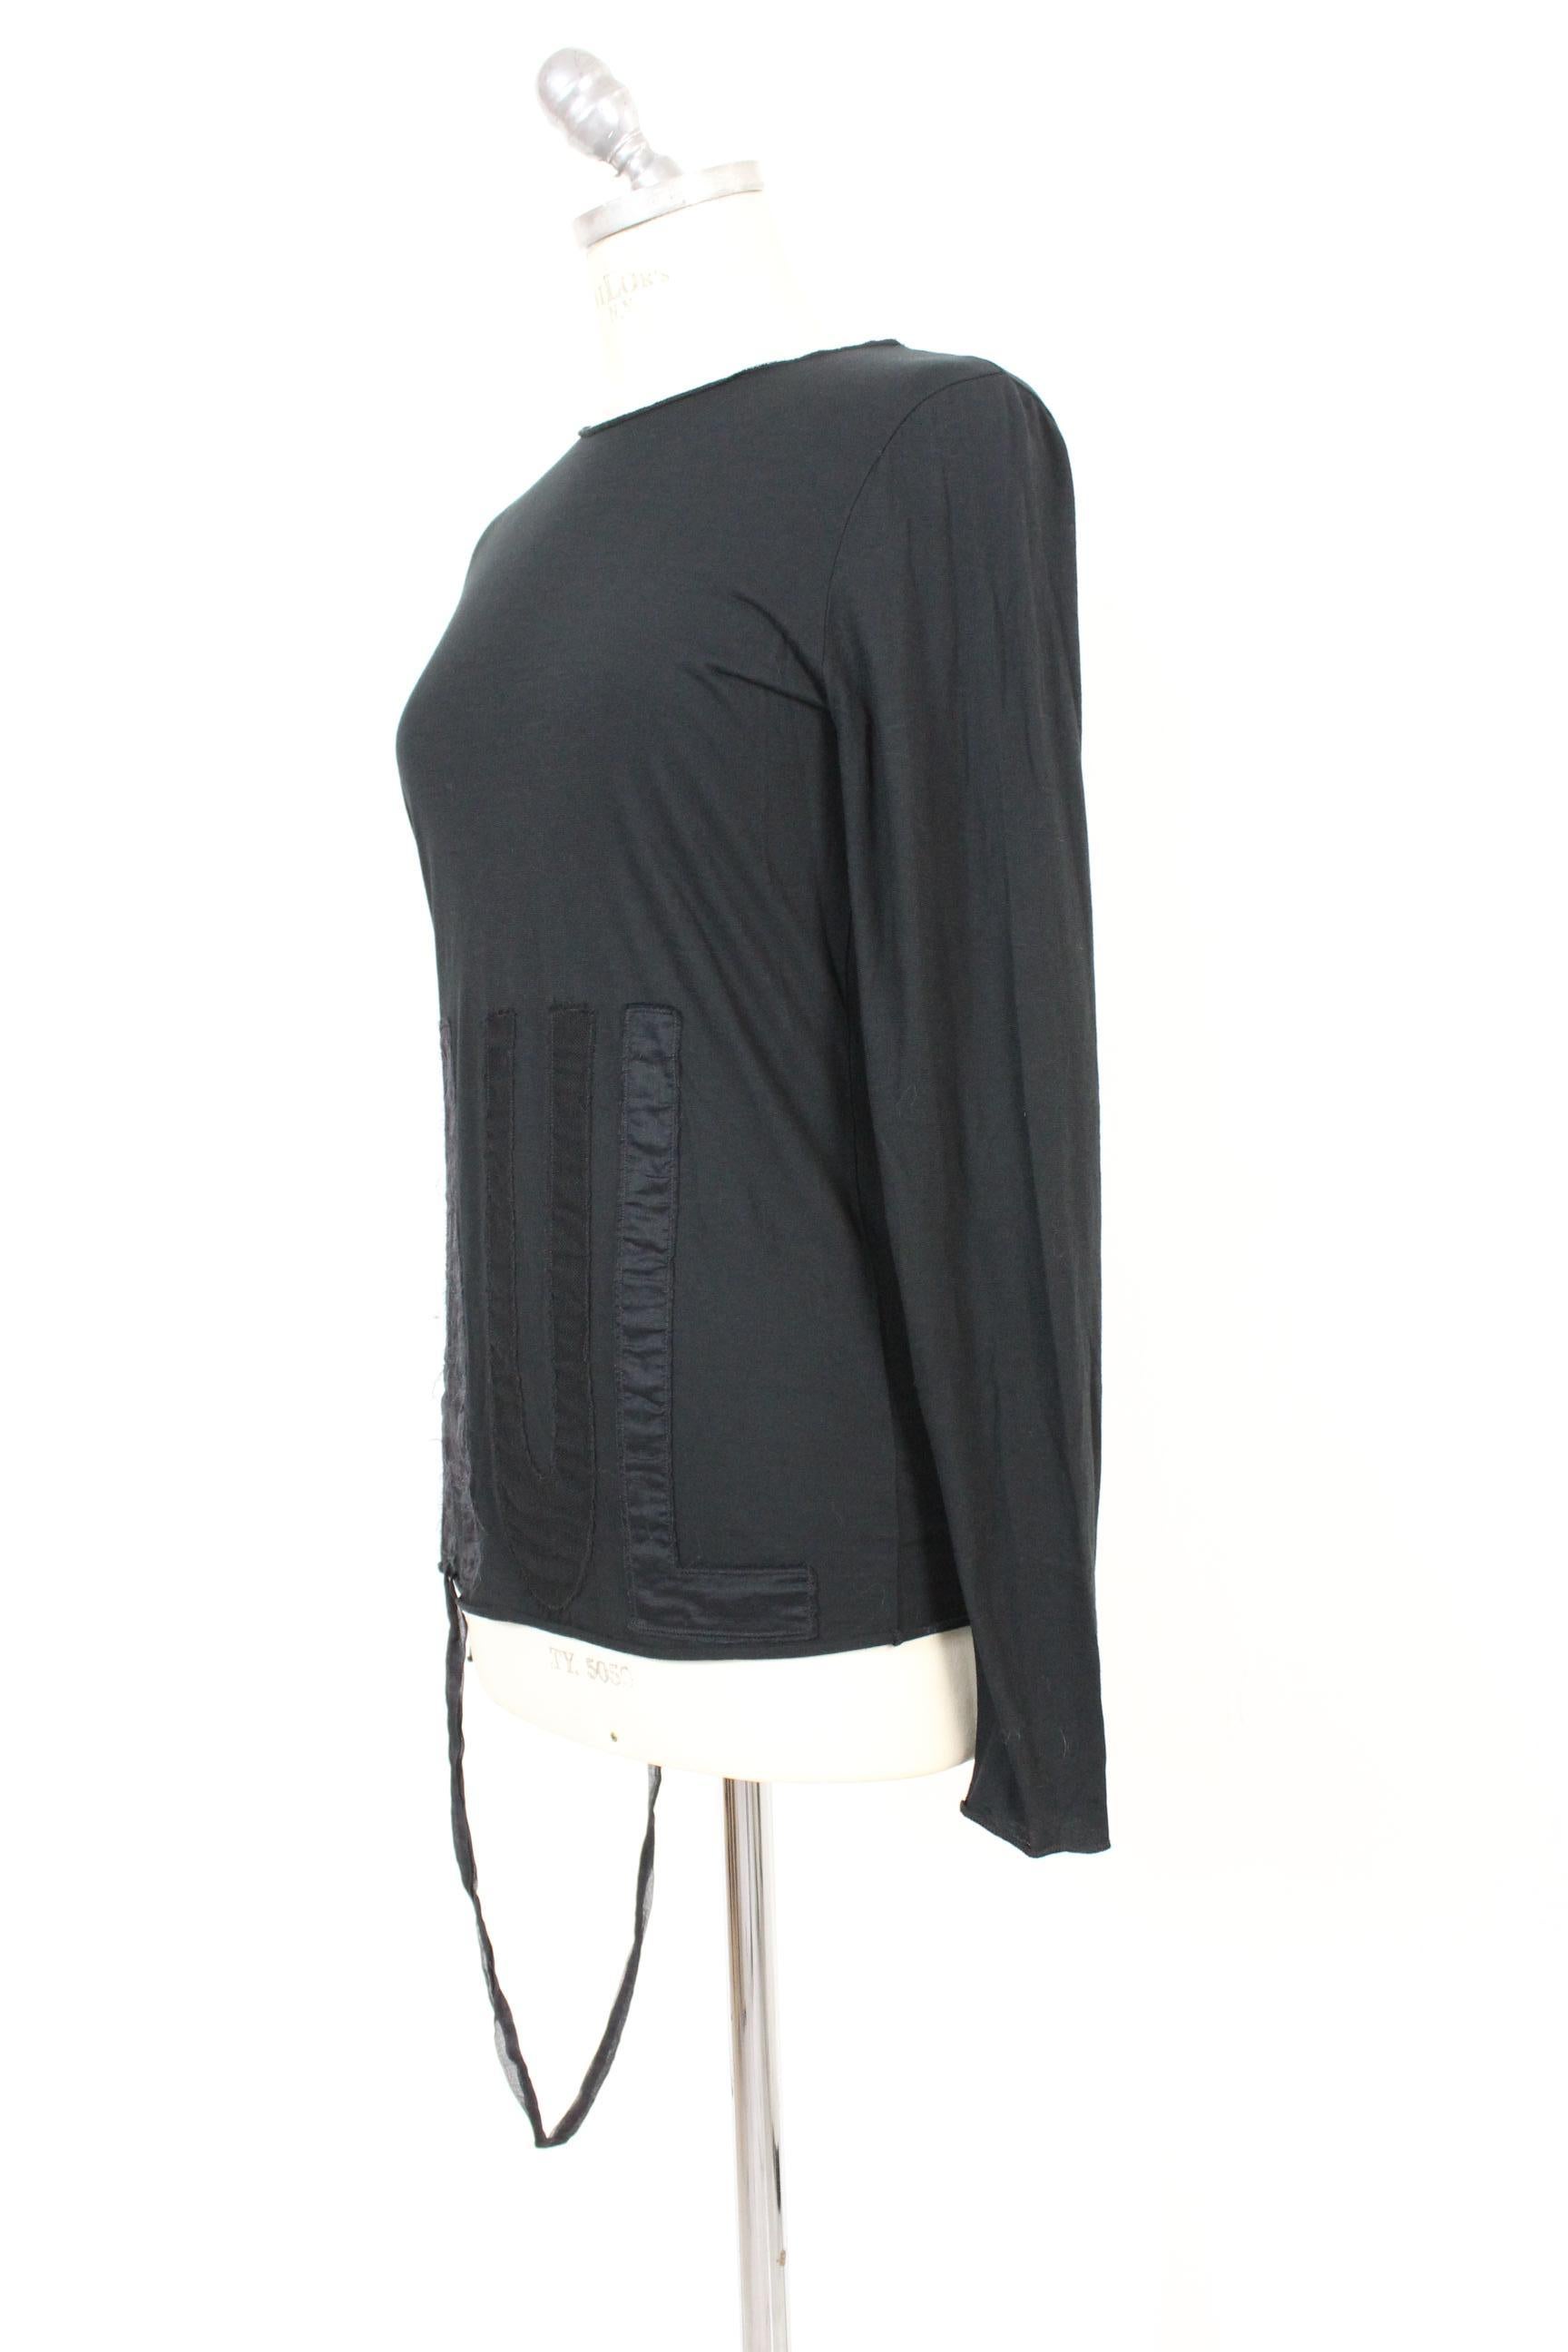 Jean Paul Gaultier Black Rayon Monogram Evening Long Shirt 1990s Waist Coulisse In Excellent Condition In Brindisi, Bt